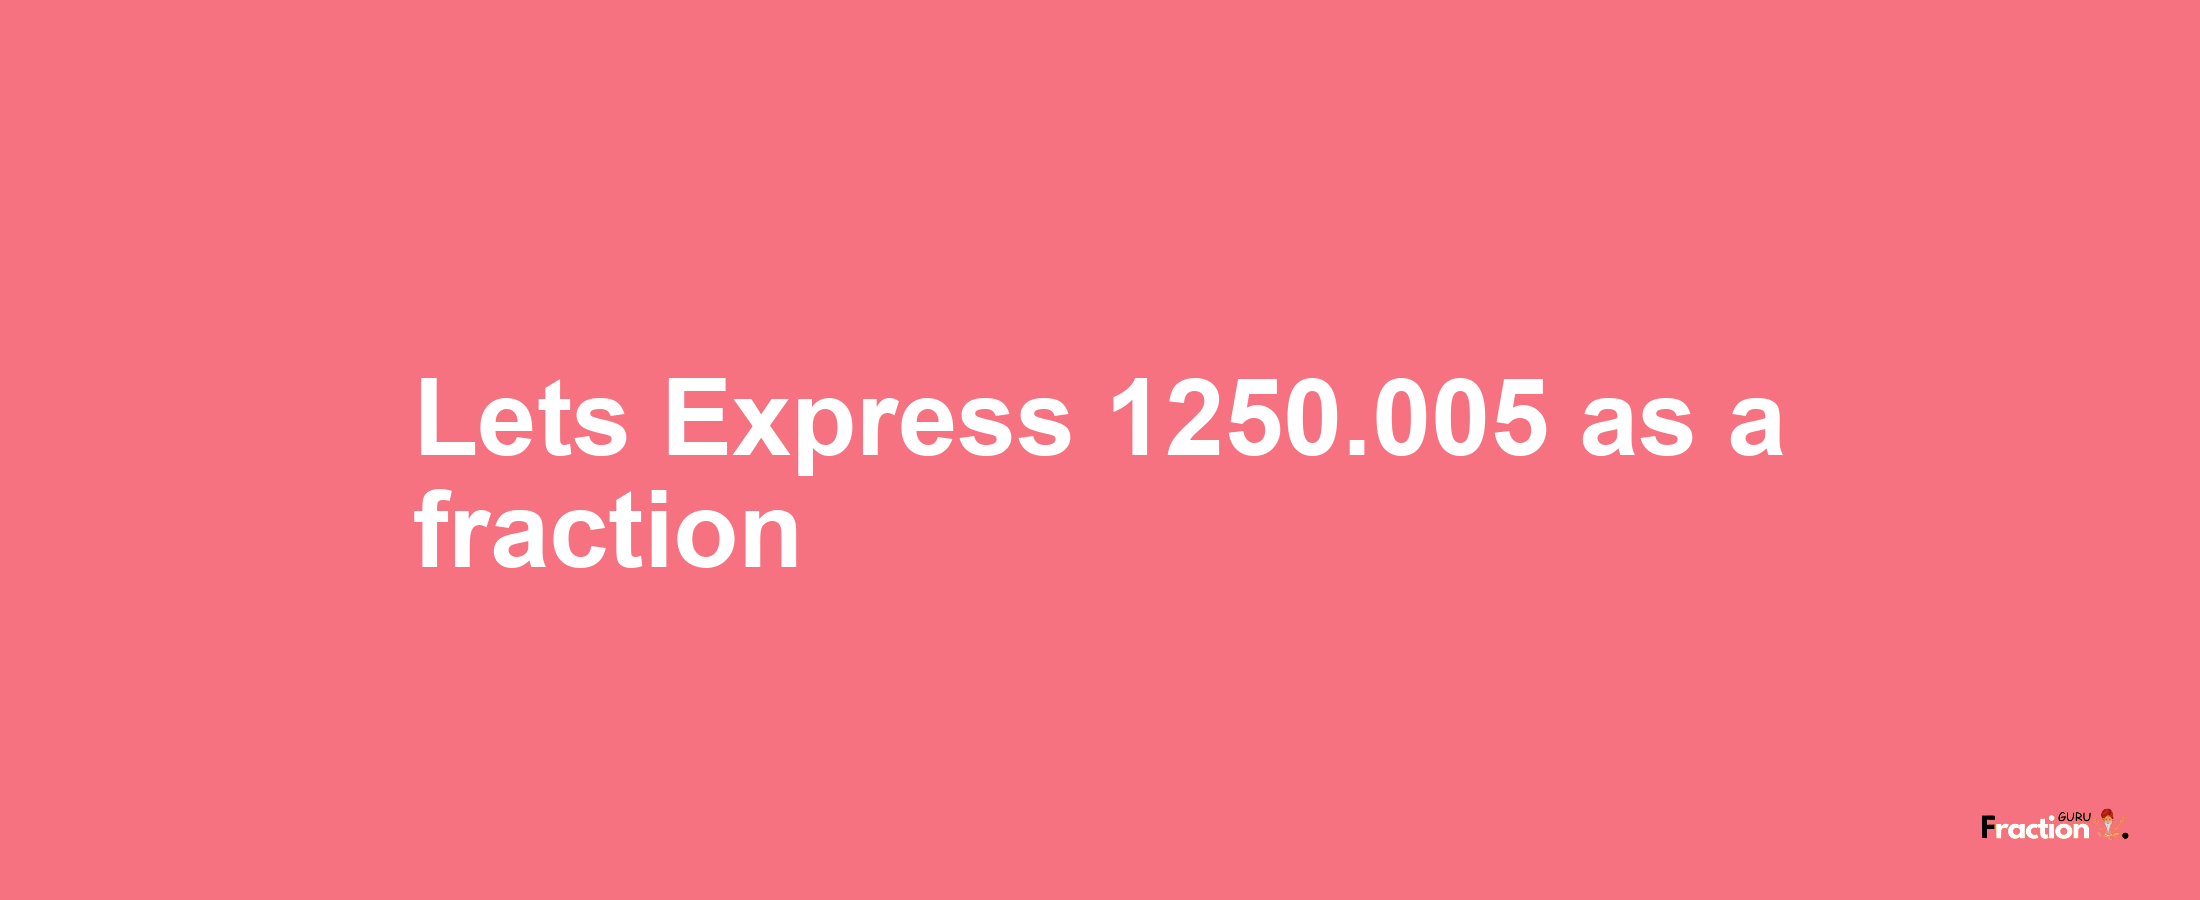 Lets Express 1250.005 as afraction